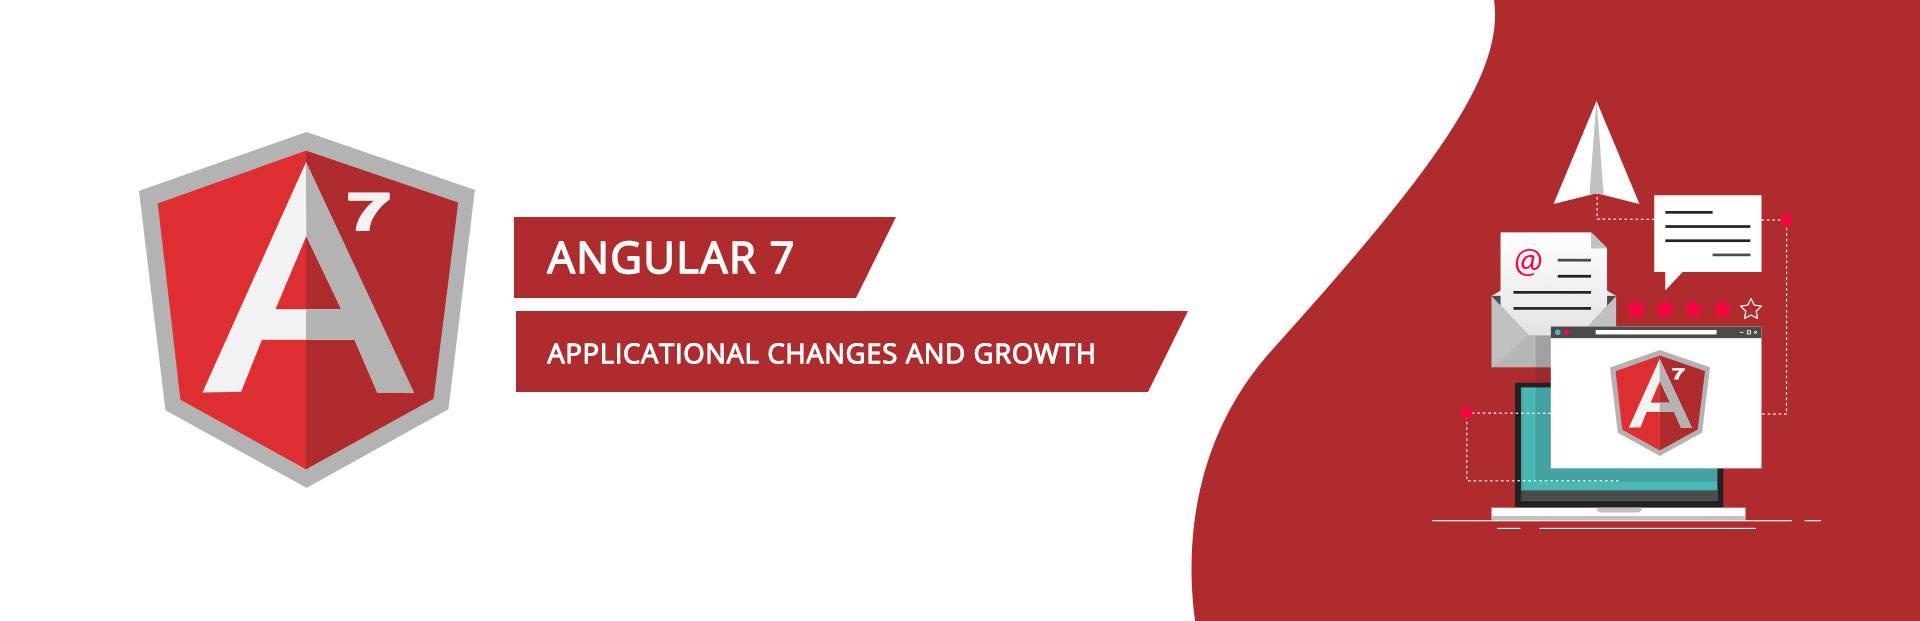 Angular 7: Applicational Changes and Growth